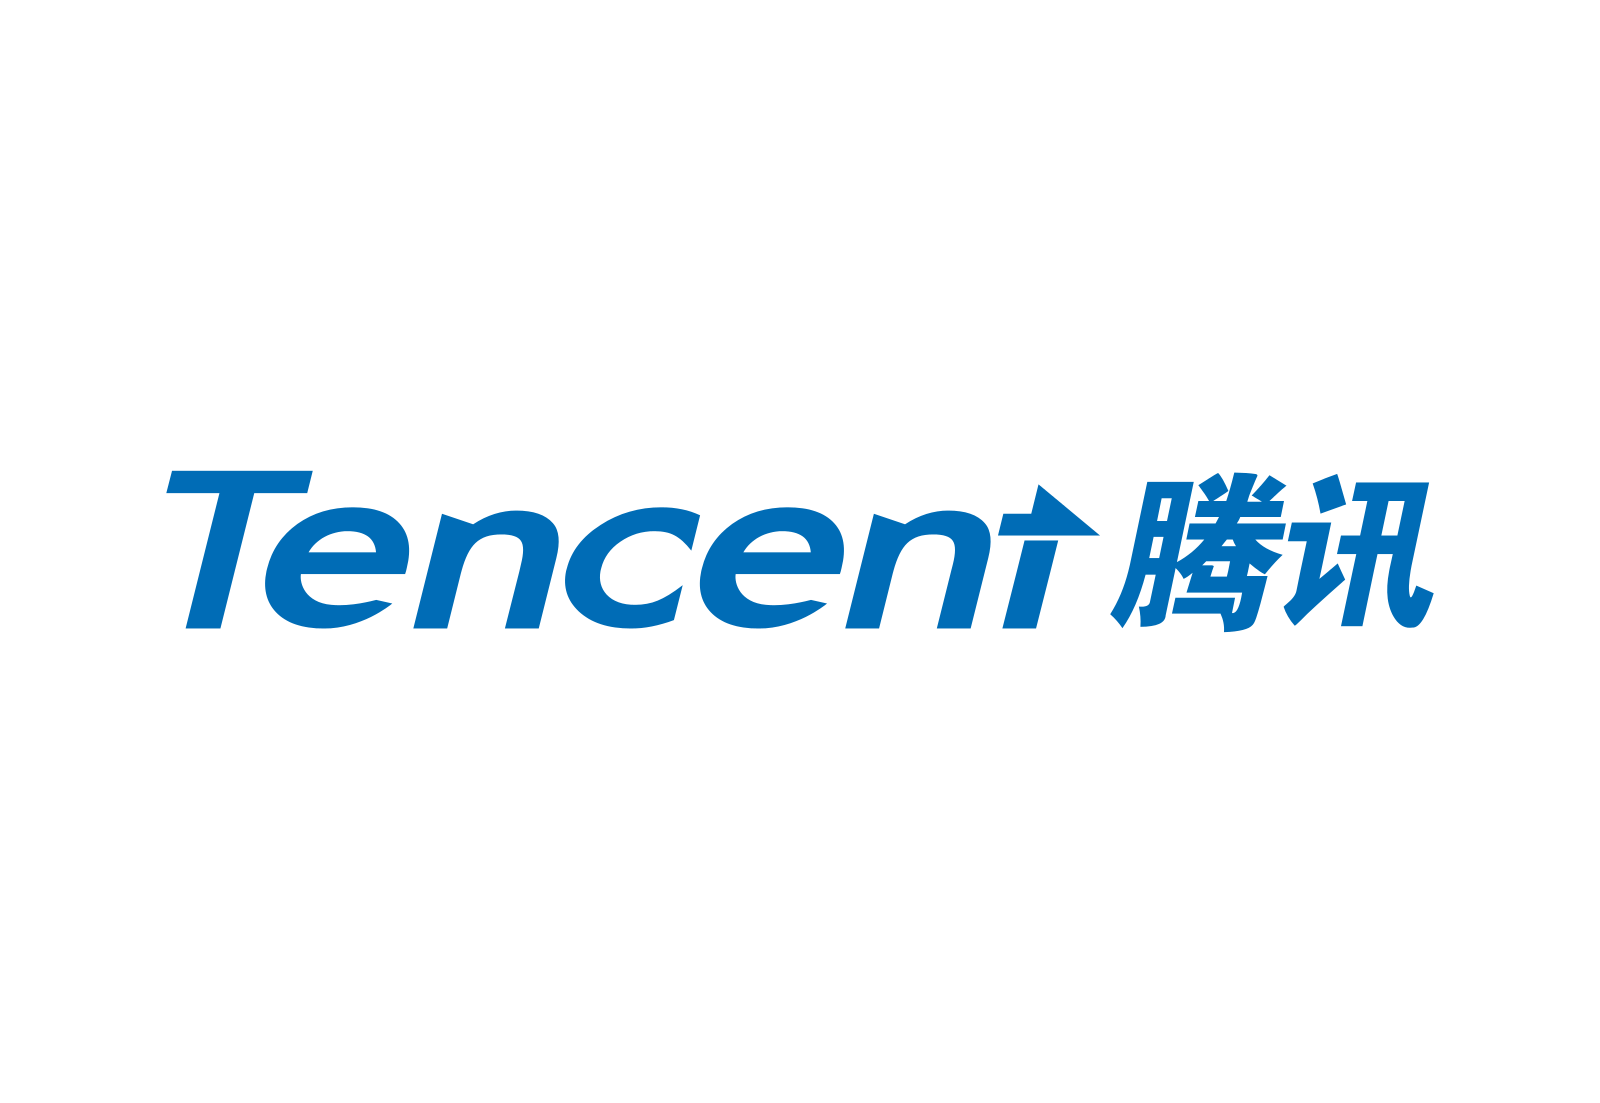 Tencent Advances in Game with